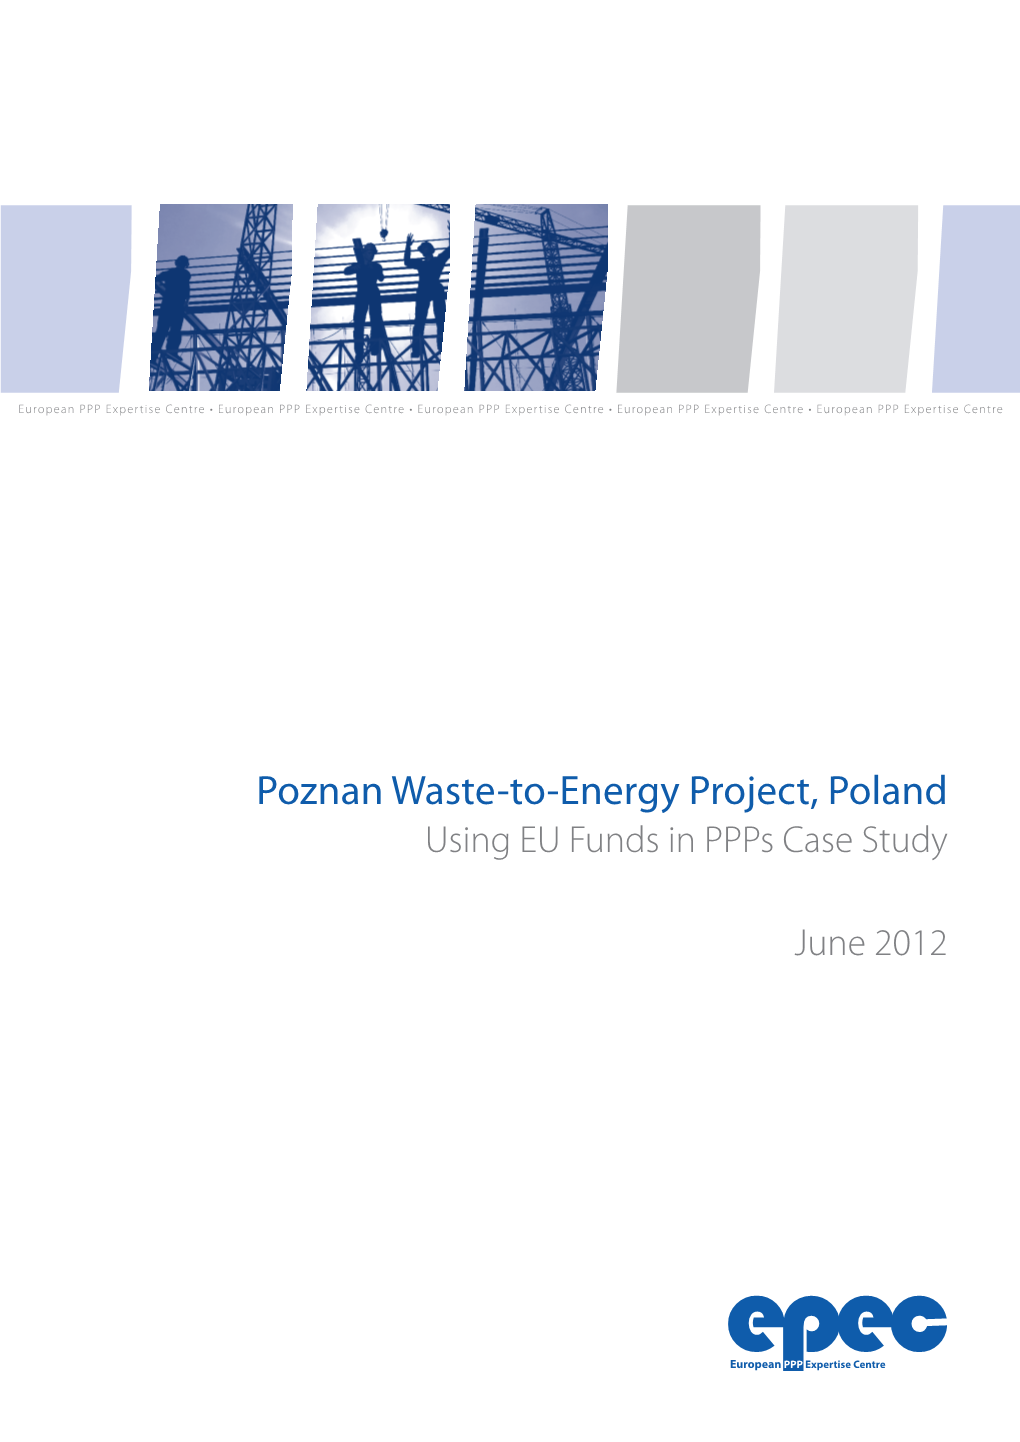 Poznan Waste-To-Energy Project, Poland Using EU Funds in Ppps Case Study